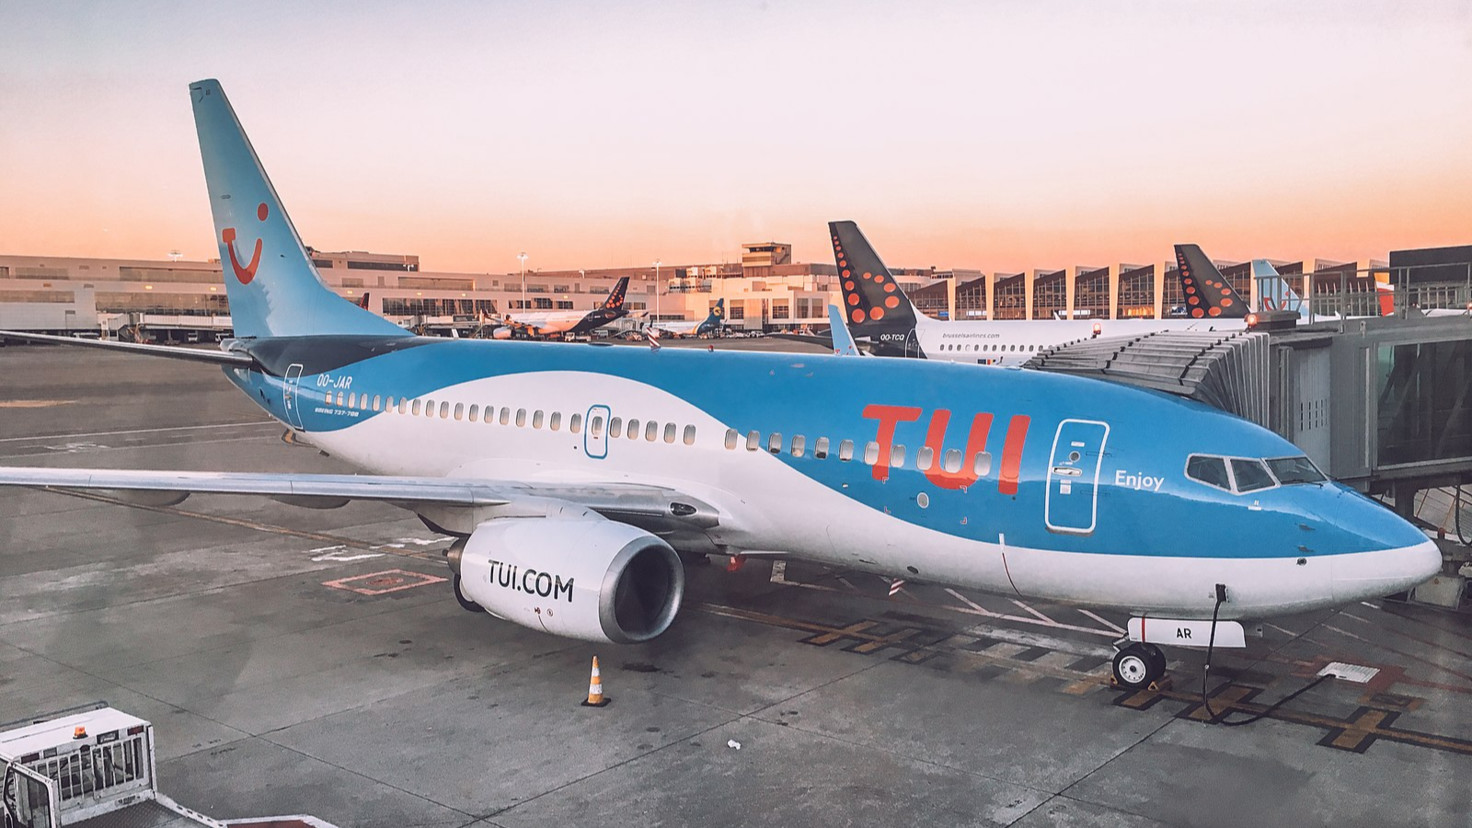 TUI airplane took off with extra weight of 1,2 tones on the board – it calculated the weight of adult passengers and children’s